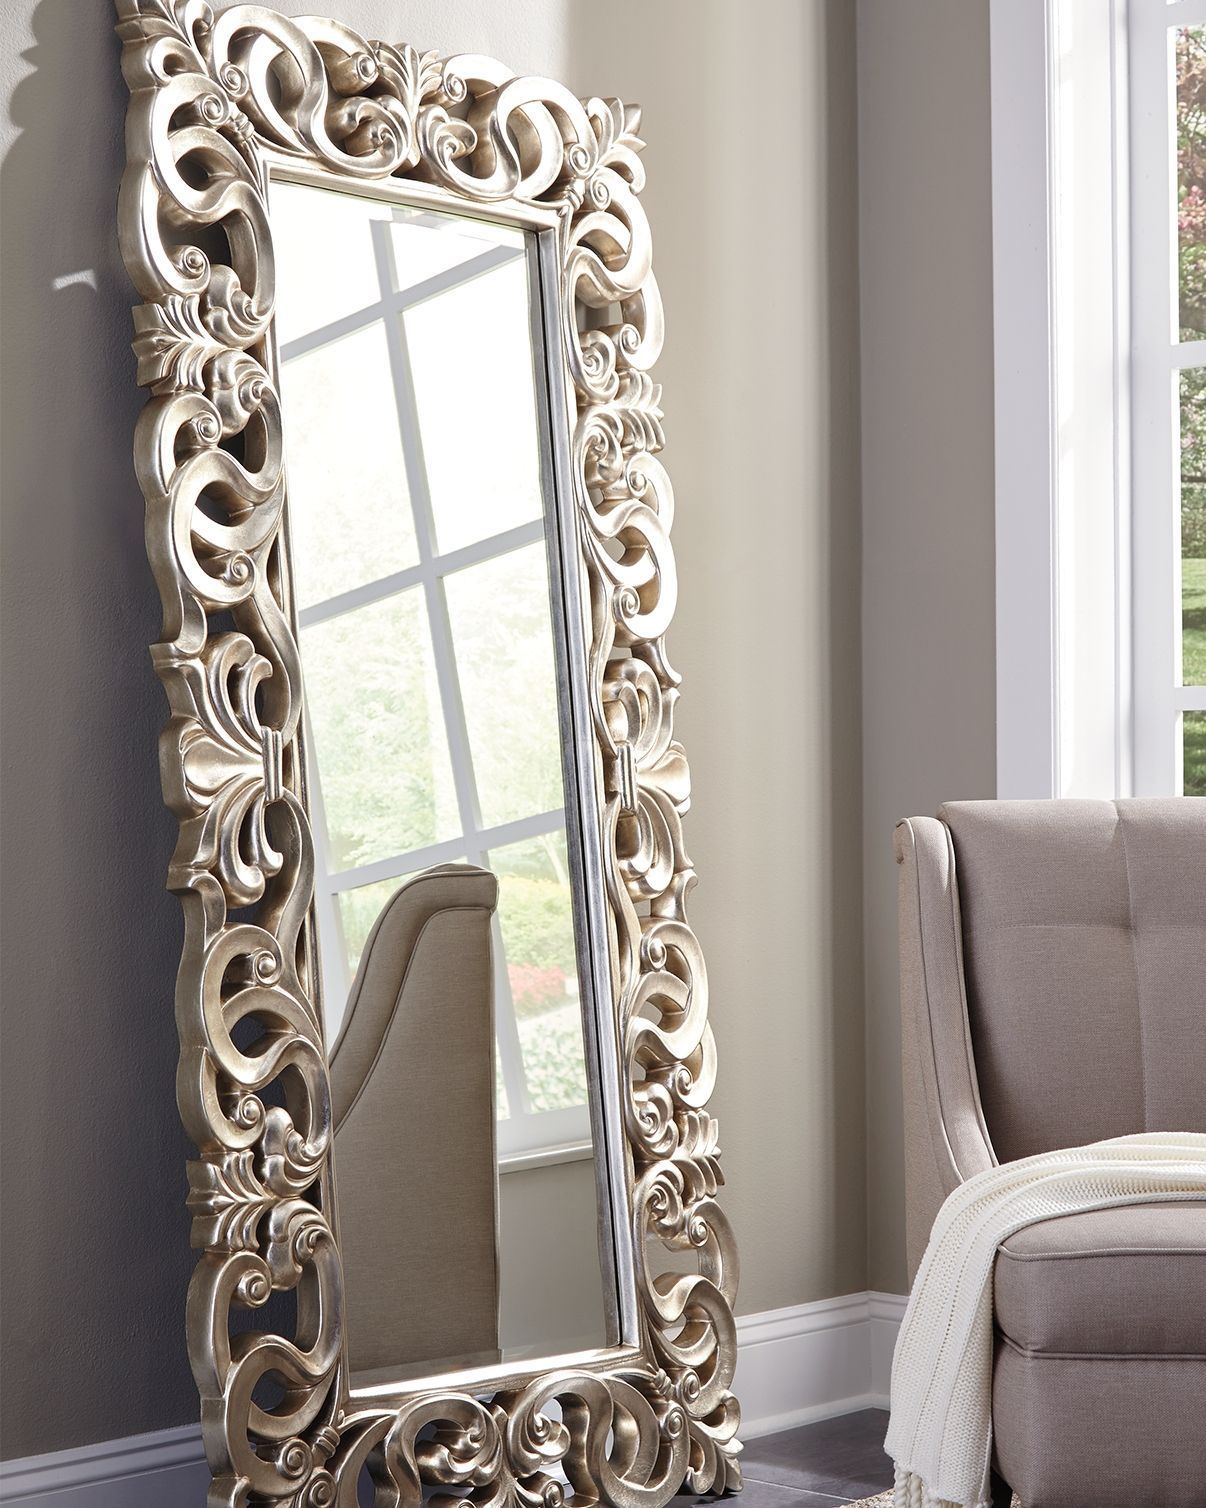 Large Silver Floor Mirror: A Reflection Of Refined Elegance